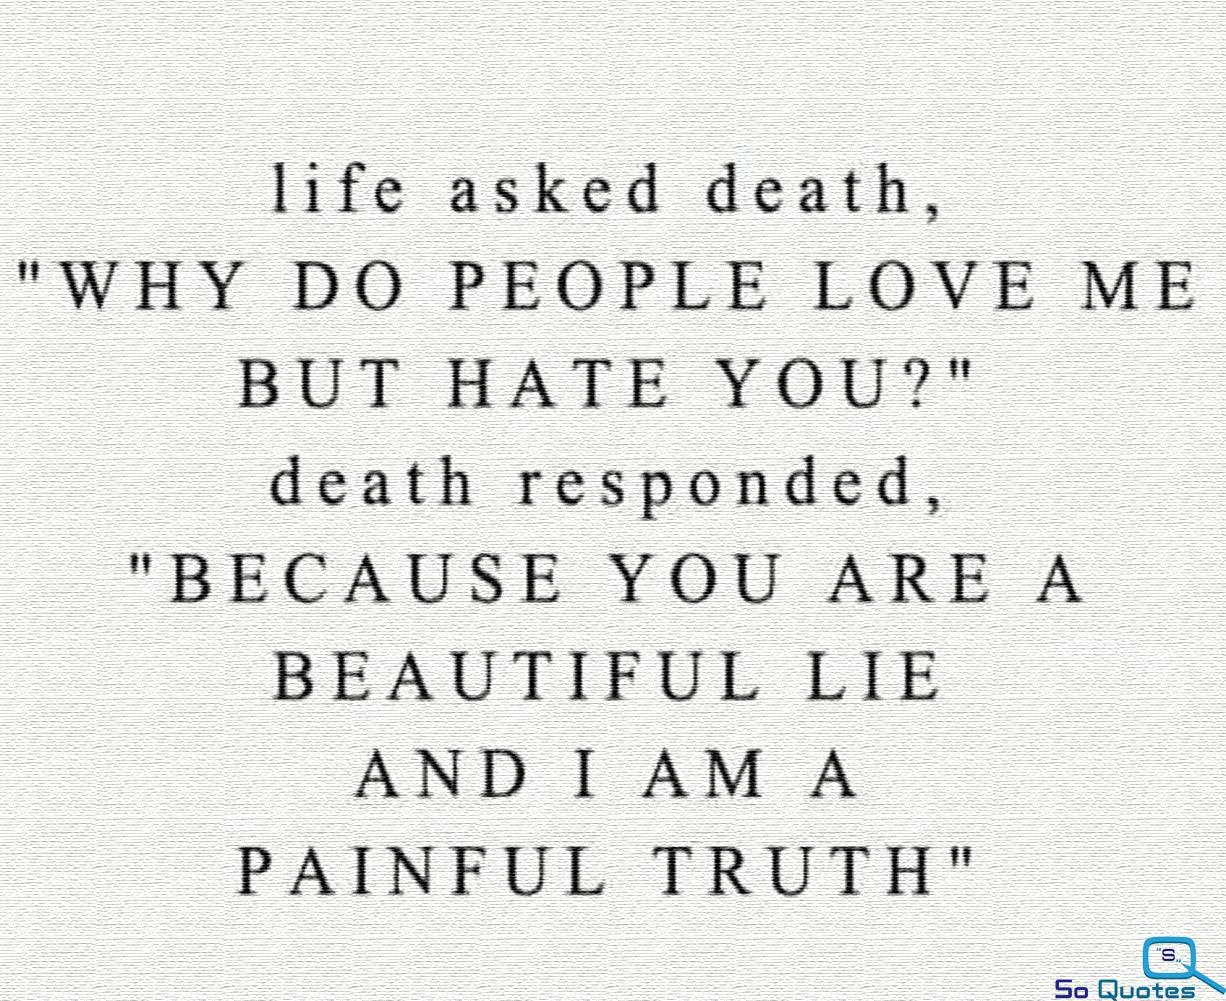 Life asked "why do people love me but hate you " Death responded "Because you are a Beautiful Lie and I am a Painful Truth"